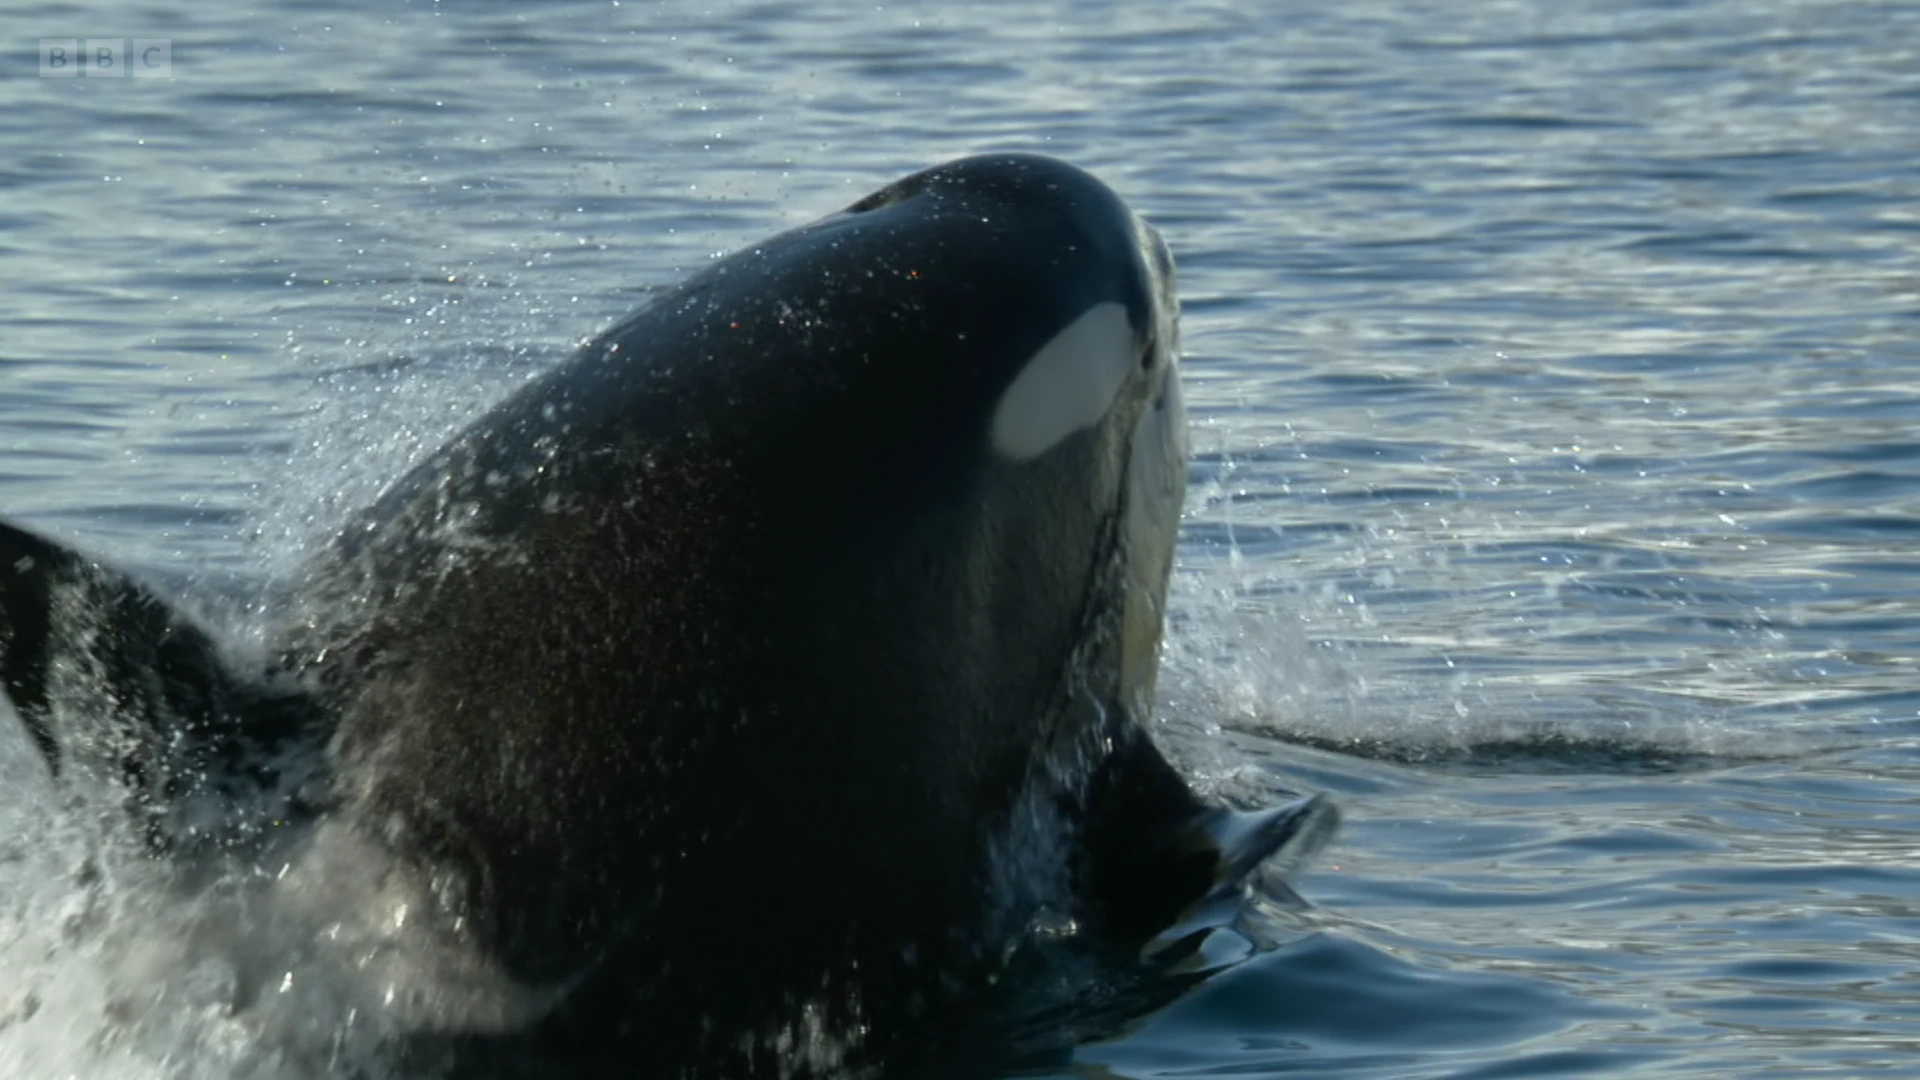 Killer whale (Orcinus orca) as shown in Seven Worlds, One Planet - Antarctica